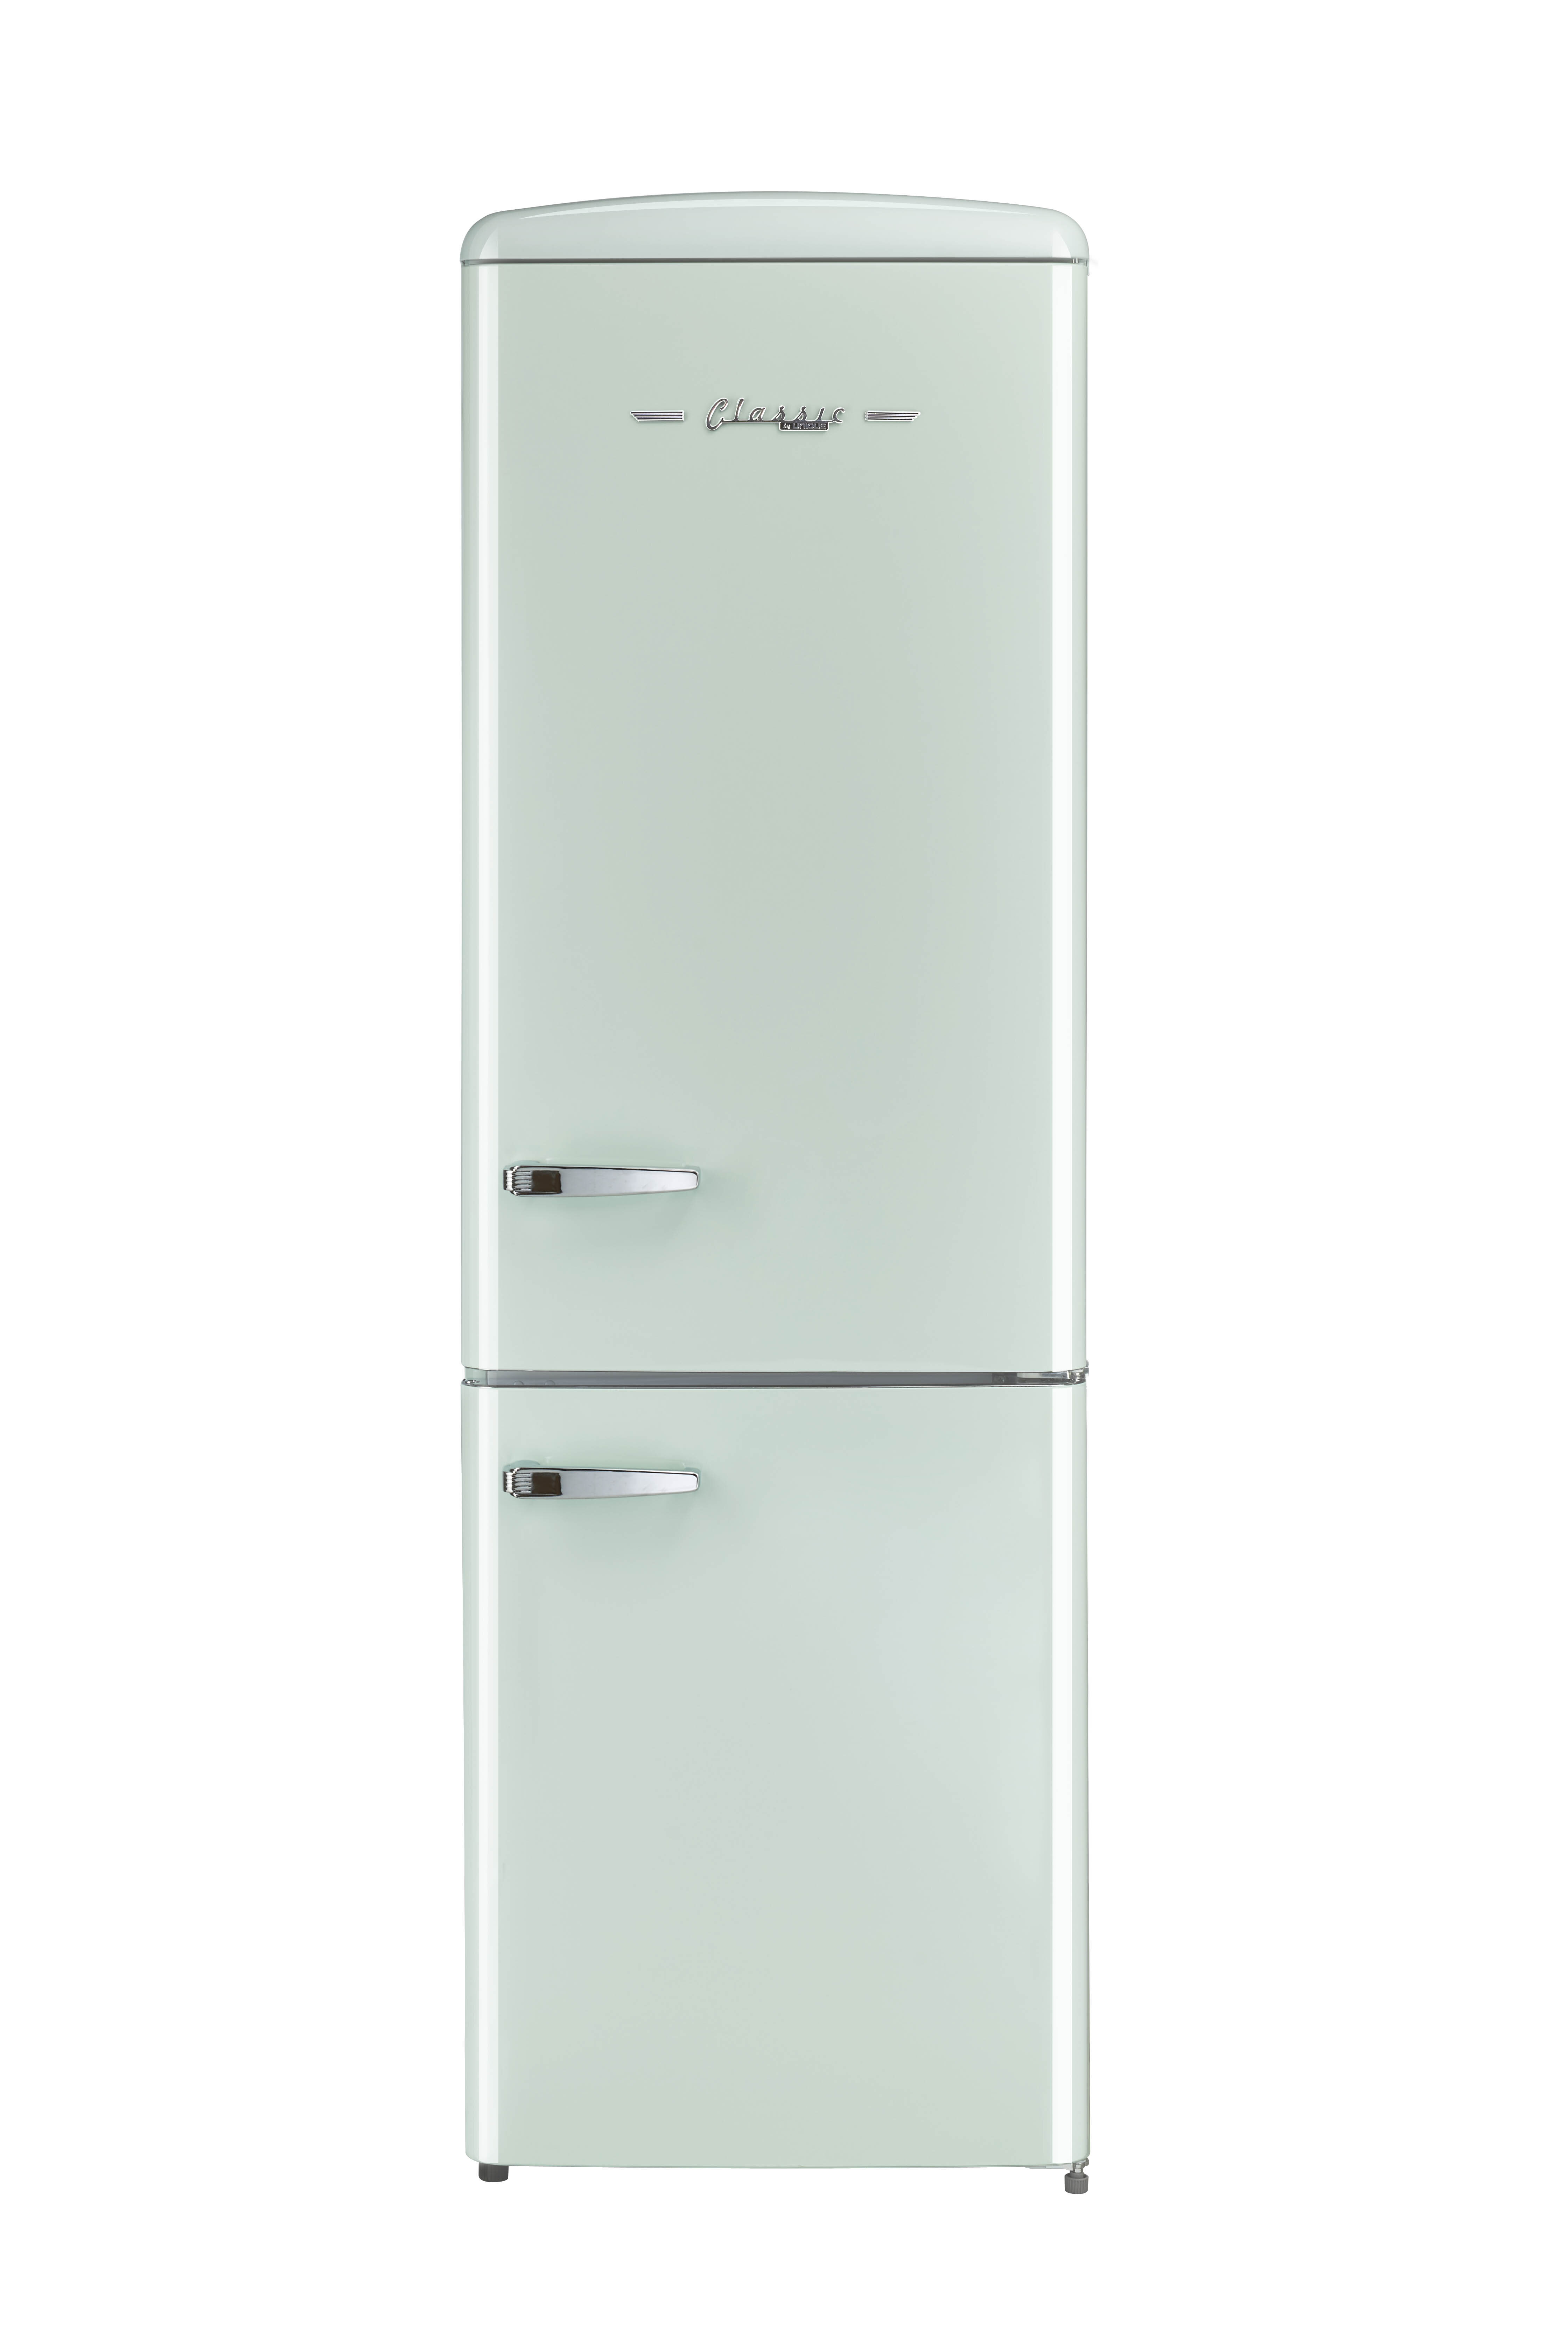 7.0 cu. ft. Frost Free Top Freezer Refrigerator in Stainless Steel Look